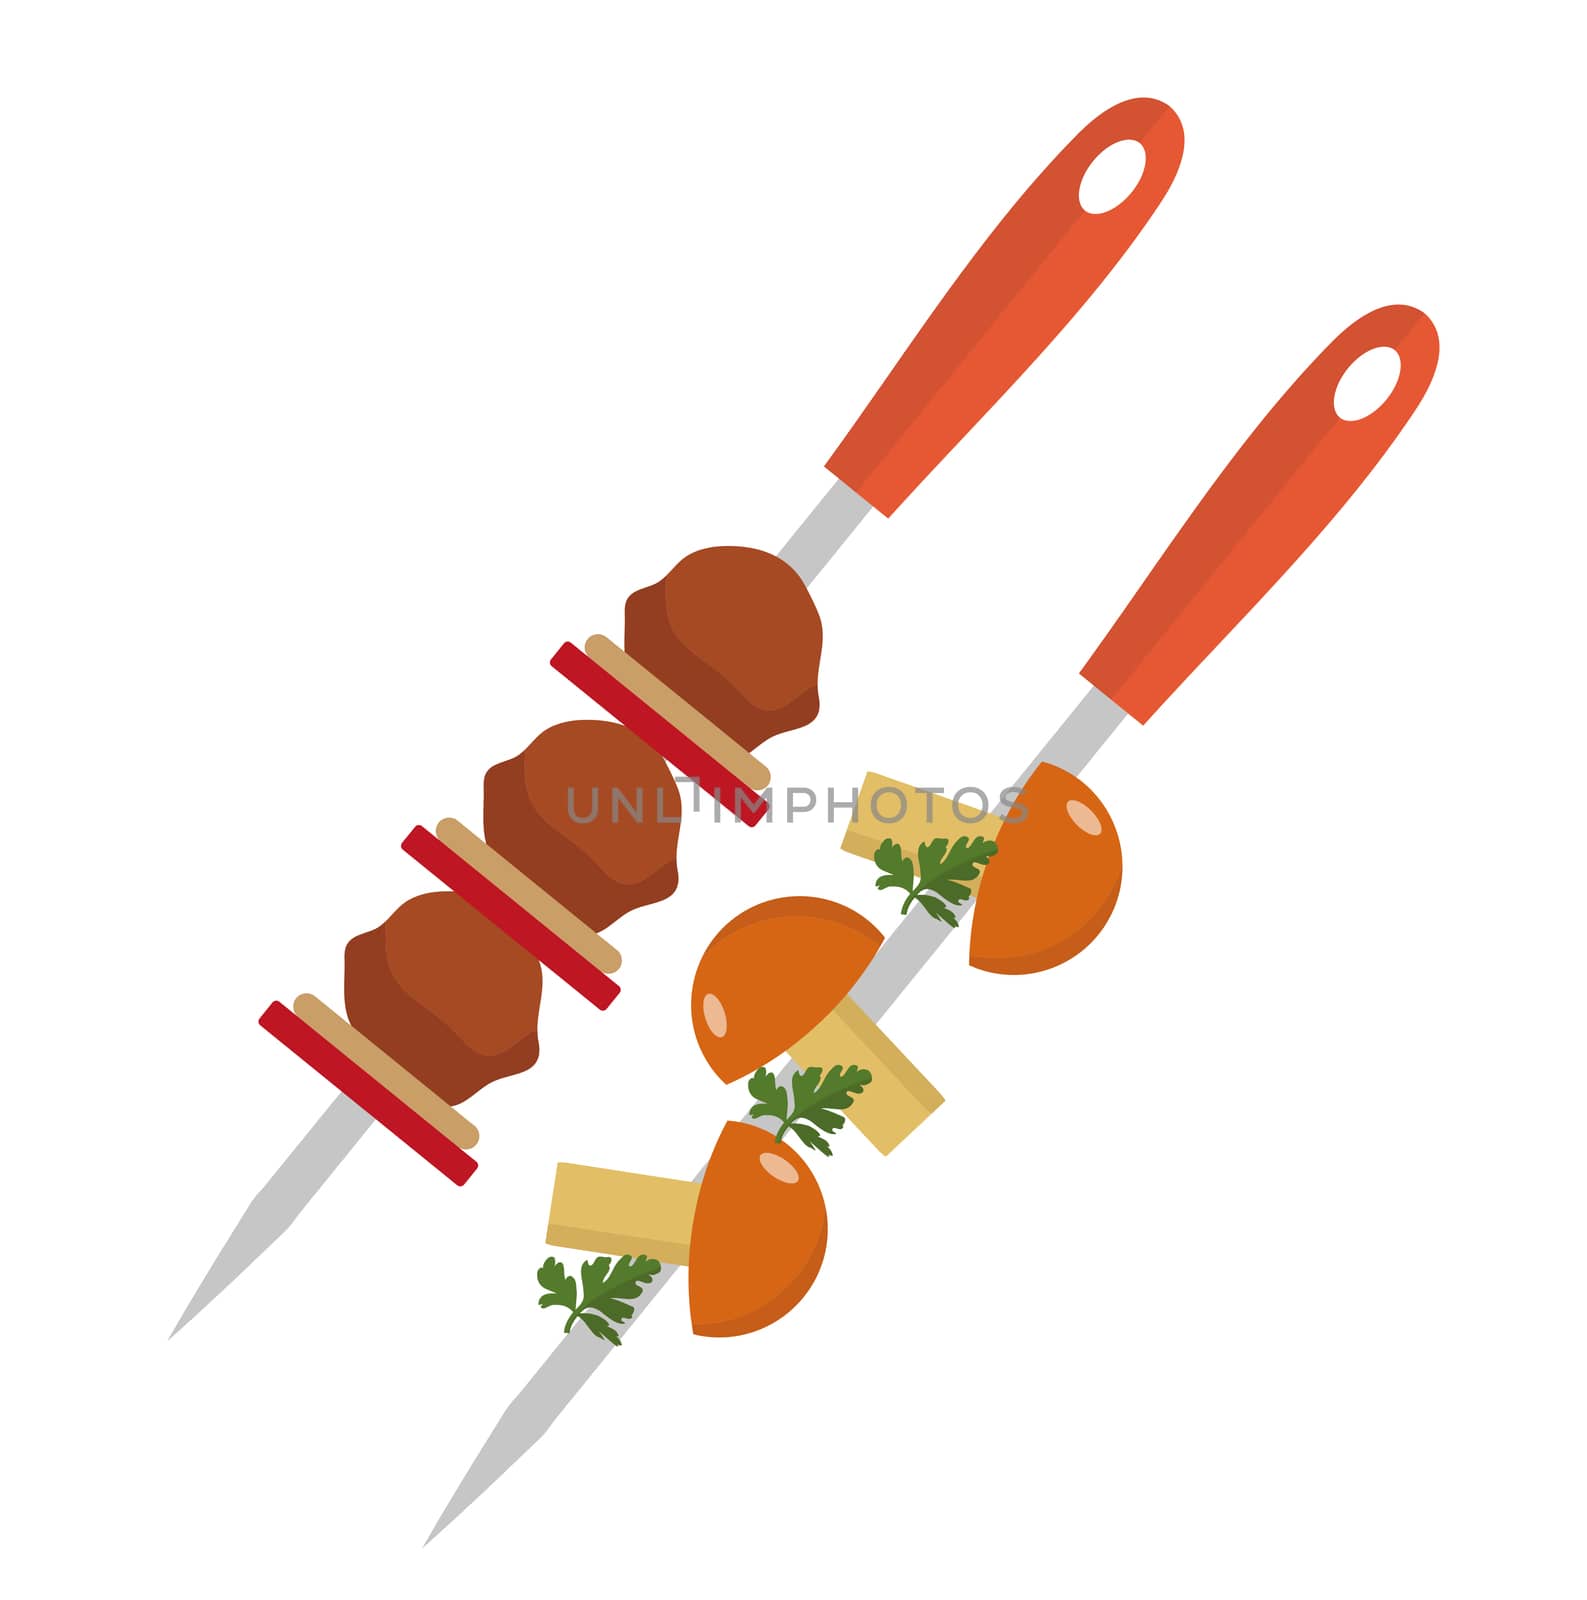 Shish kebab on skewers with pork and mushrooms icon, flat style. Isolated on white background. illustration. by lucia_fox